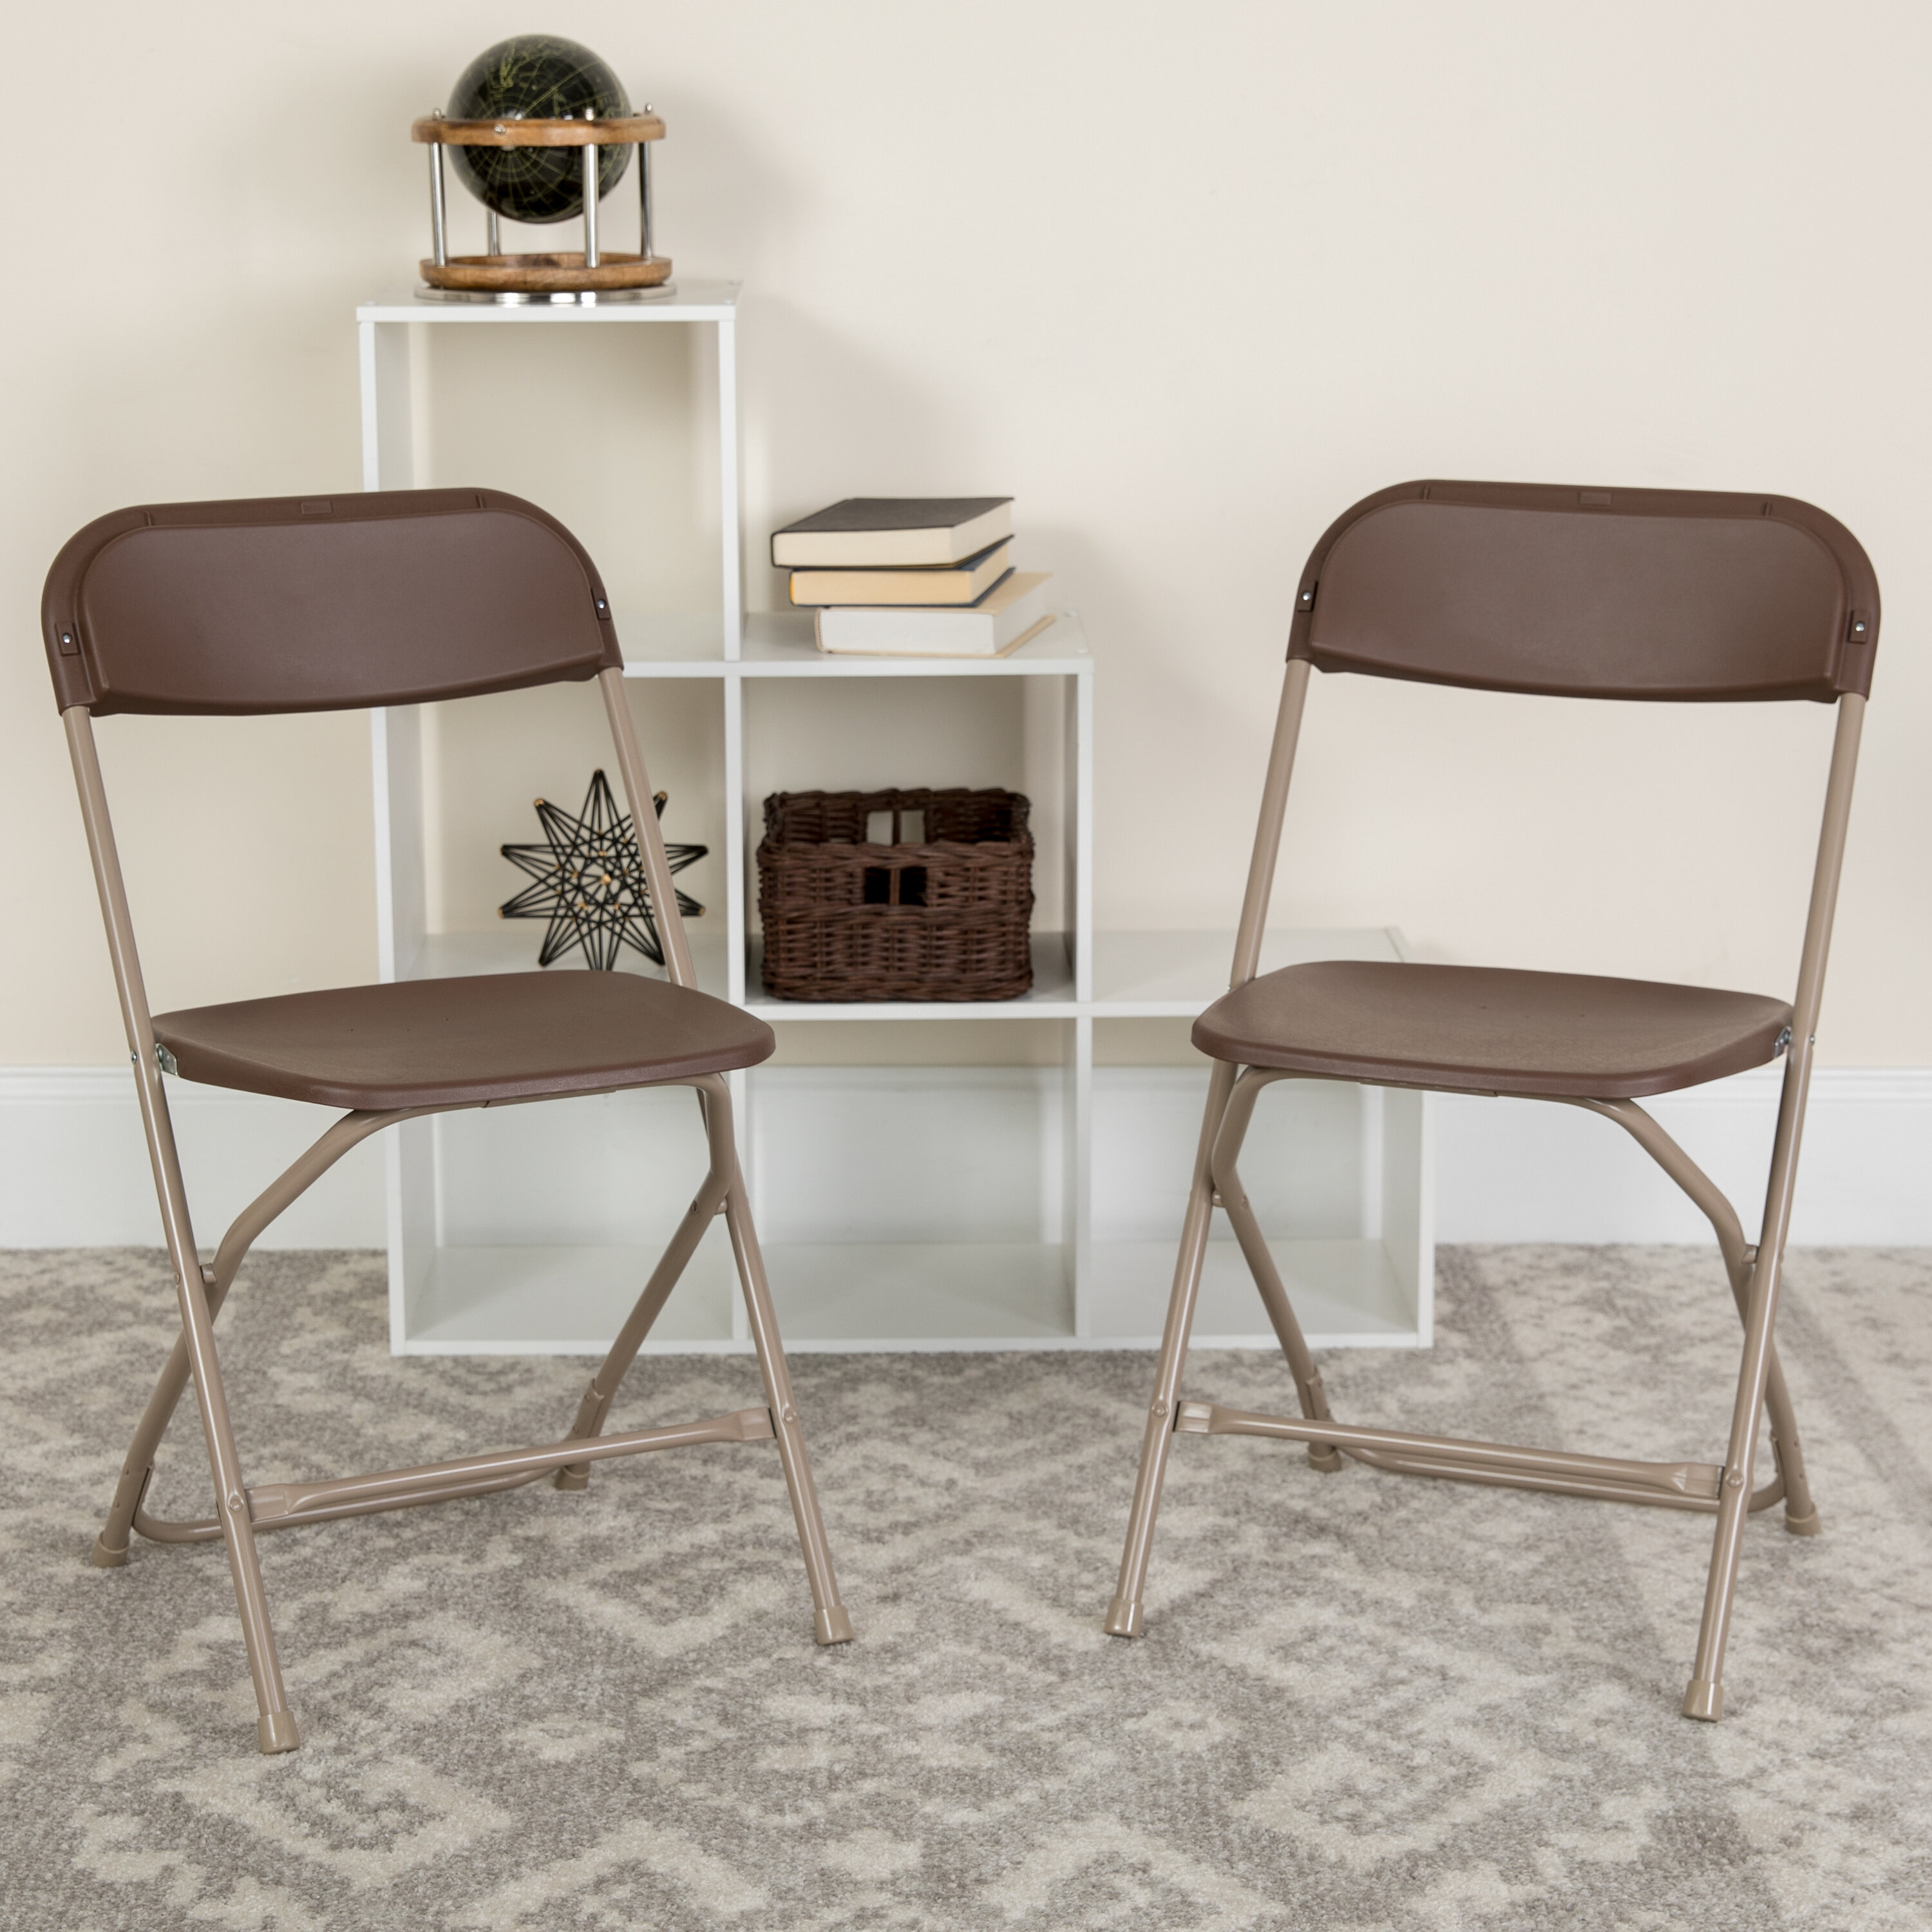 Brown Folding Chairs You Ll Love In 2021 Wayfair